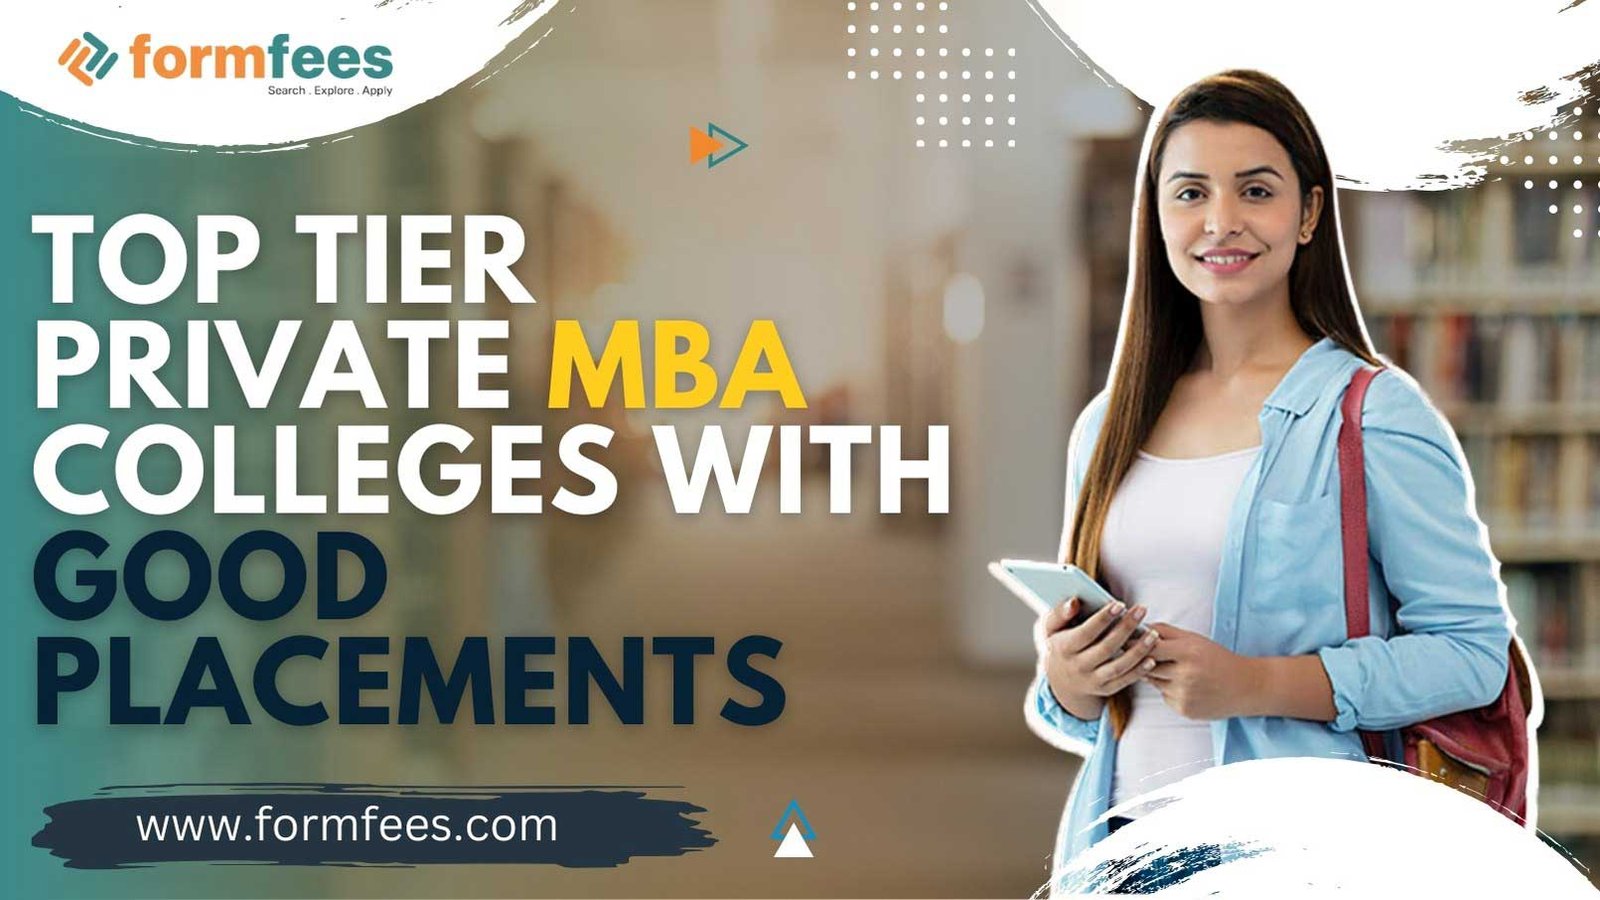 Top Tier Private MBA Colleges with Good Placements